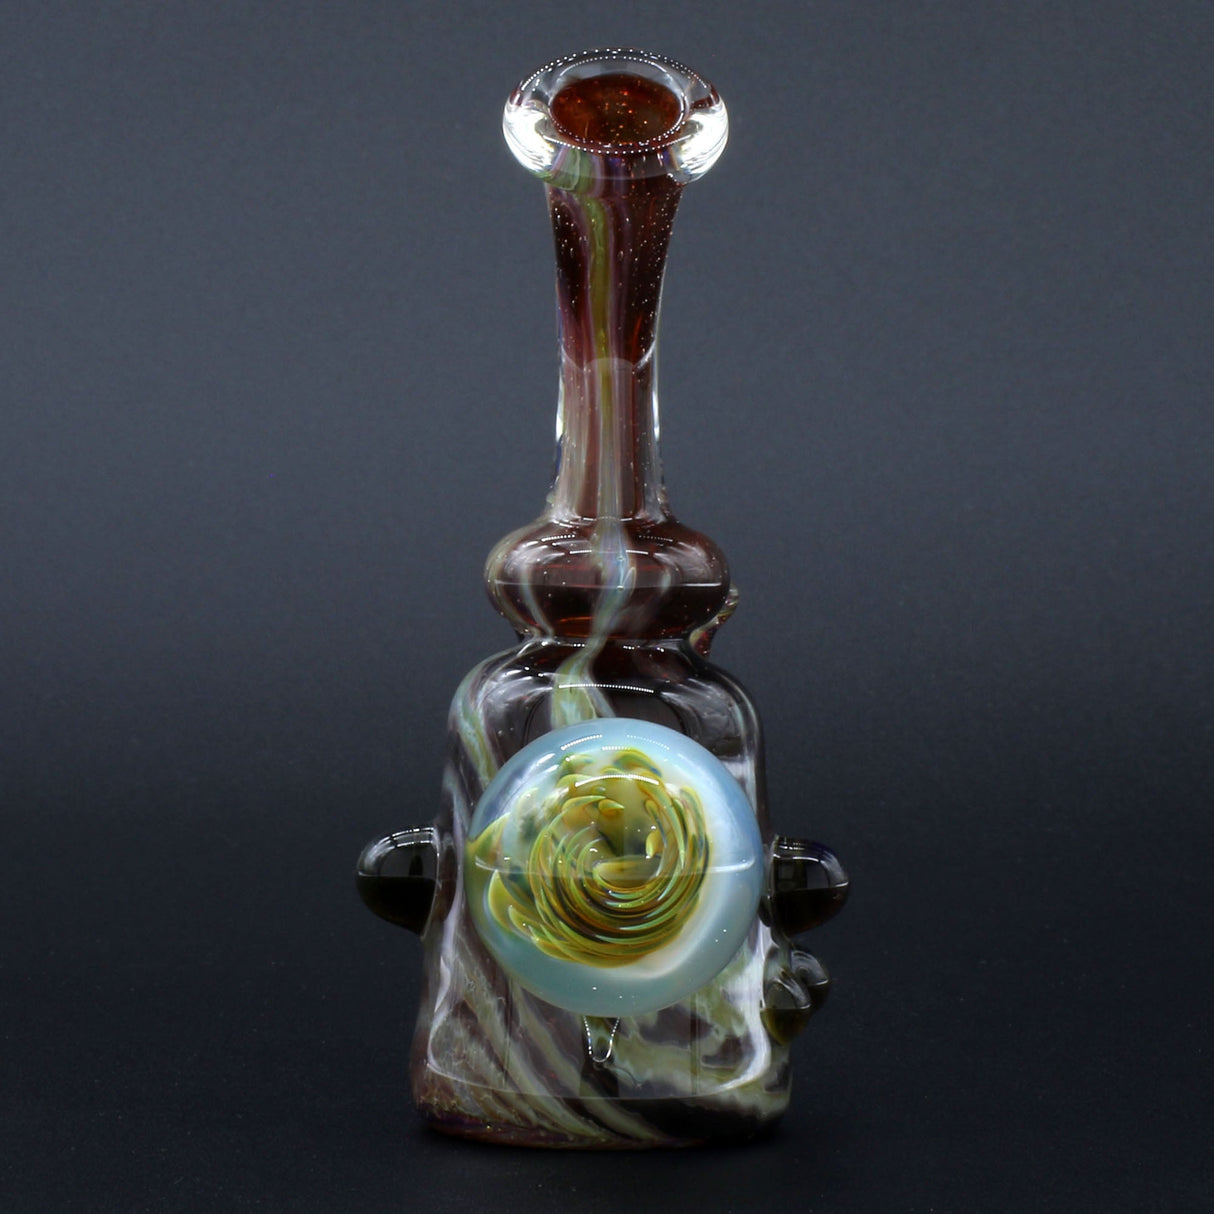 Clayball Glass "Blood Moon" Heady Sherlock Dab Rig with intricate design, front view on black background